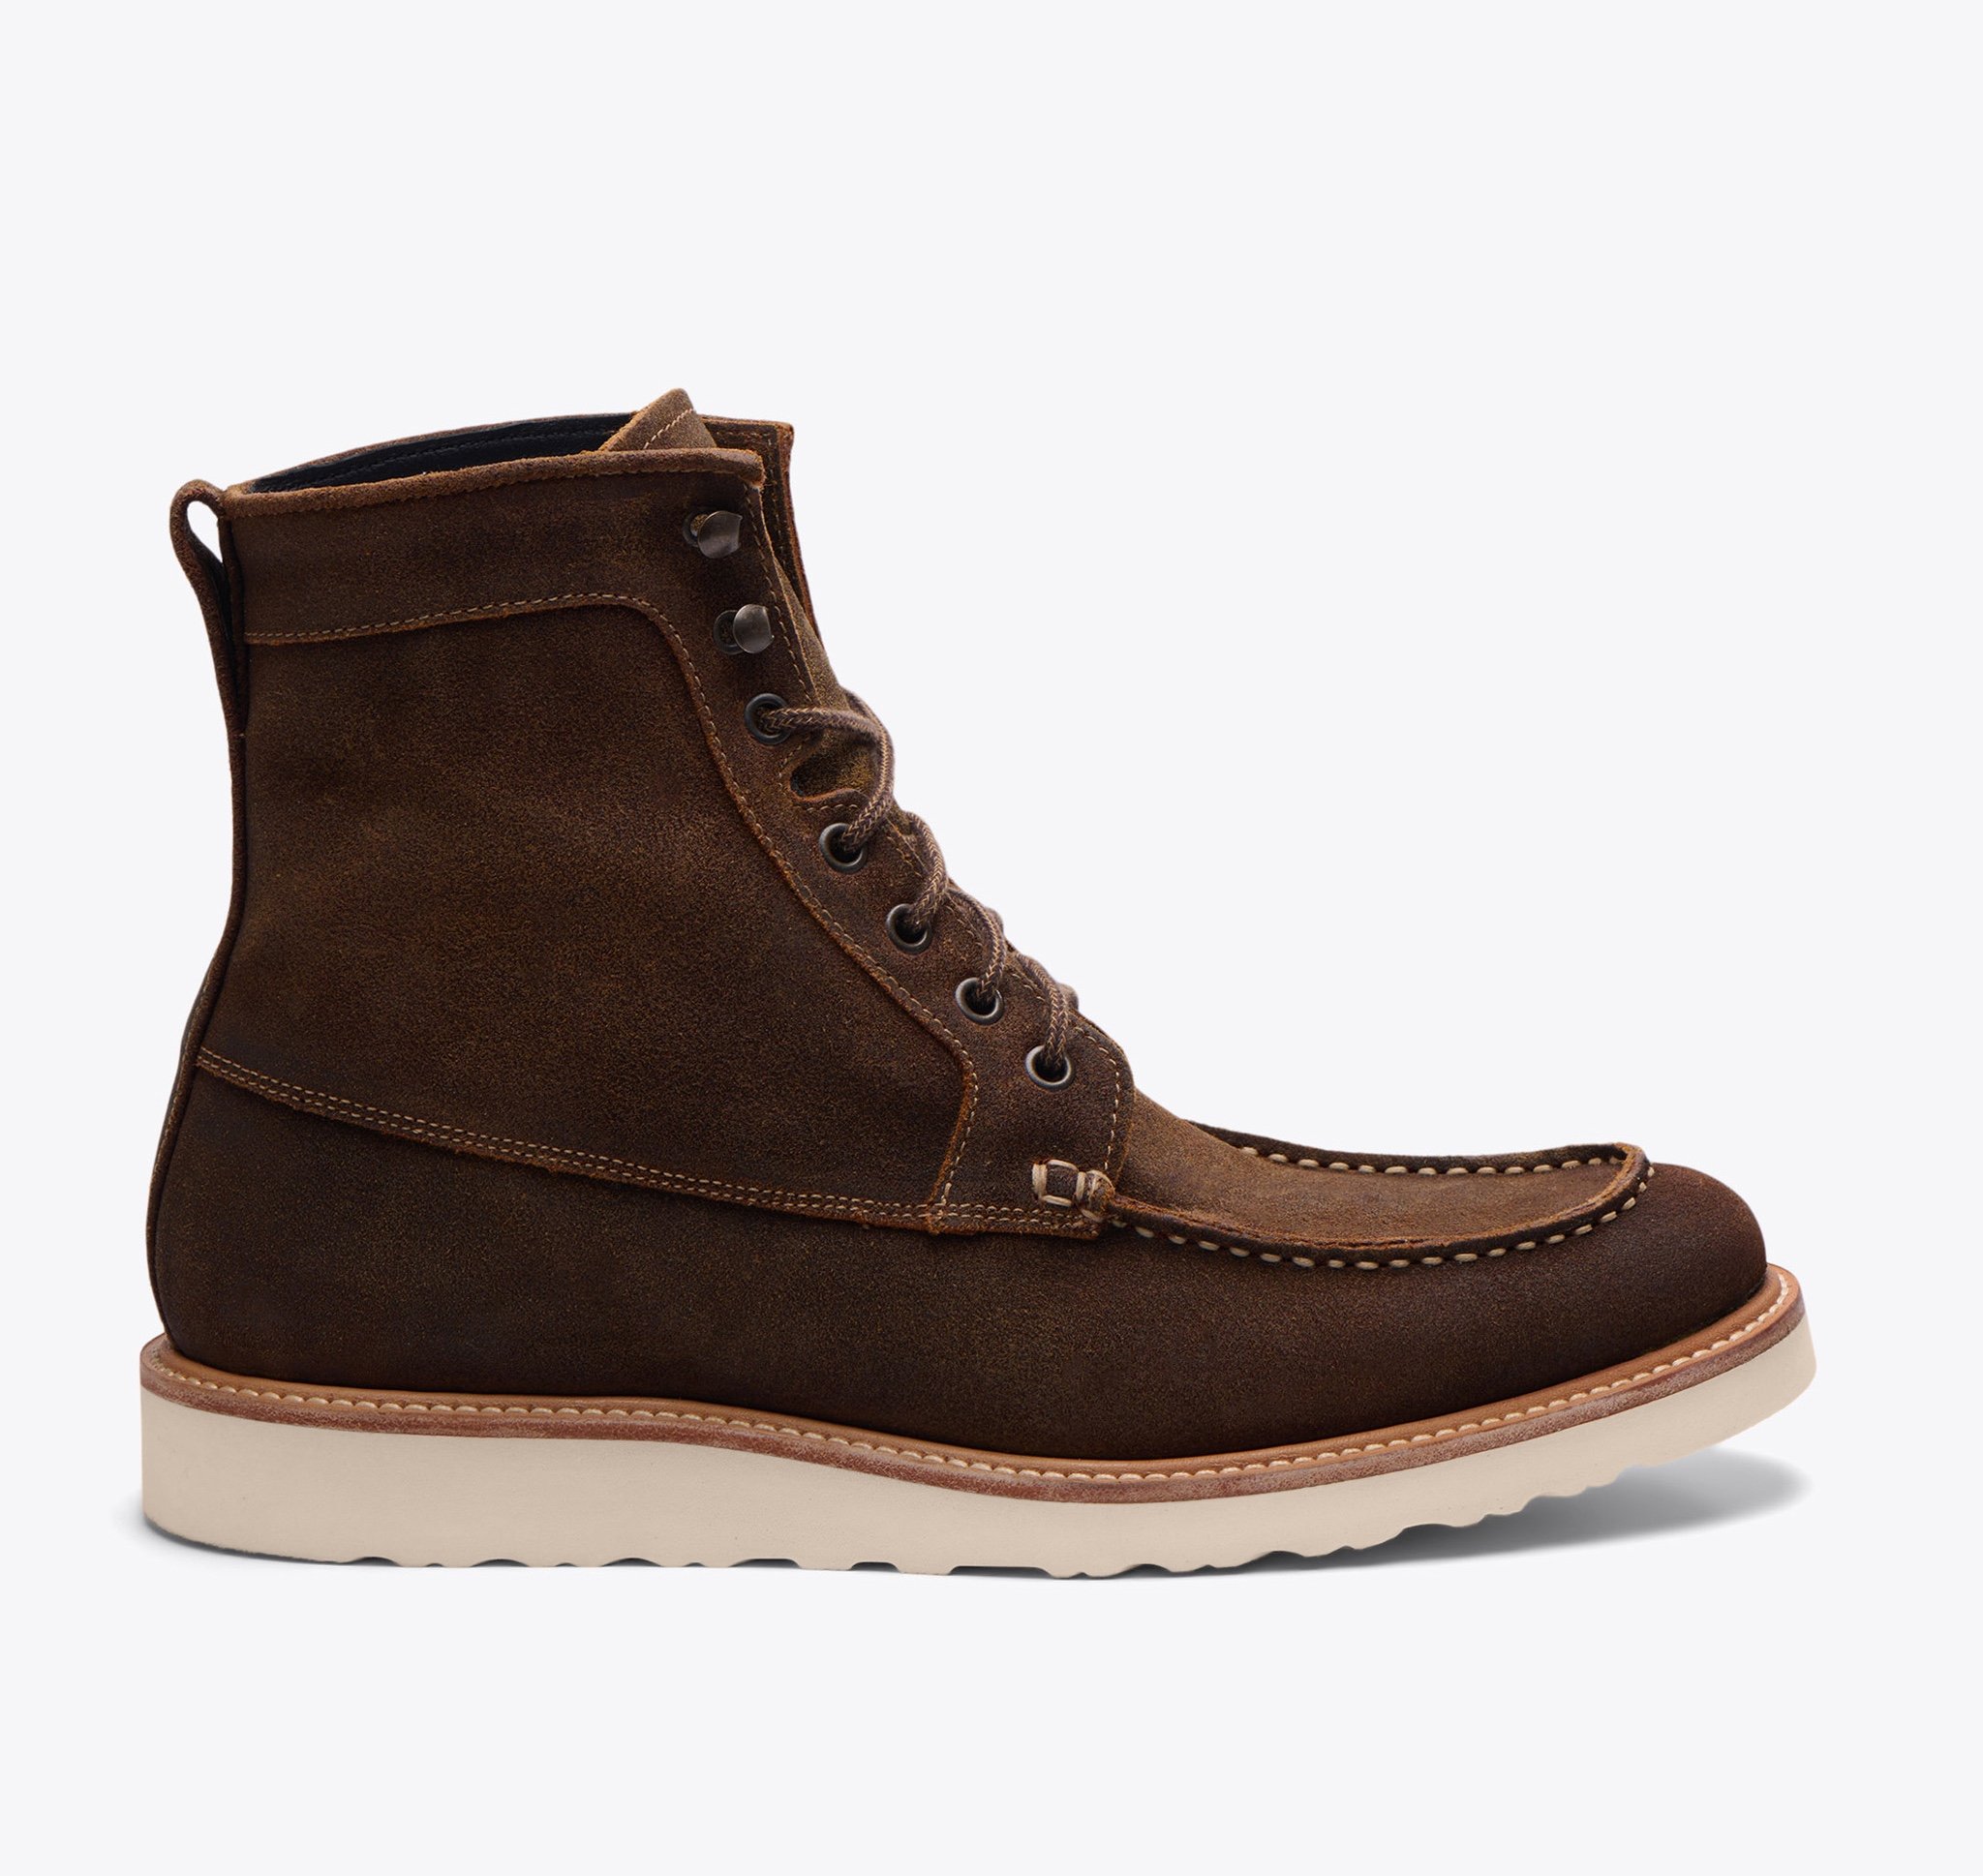 Nisolo All-Weather Mateo Boot Waxed Brown - Every Nisolo product is built on the foundation of comfort, function, and design. 